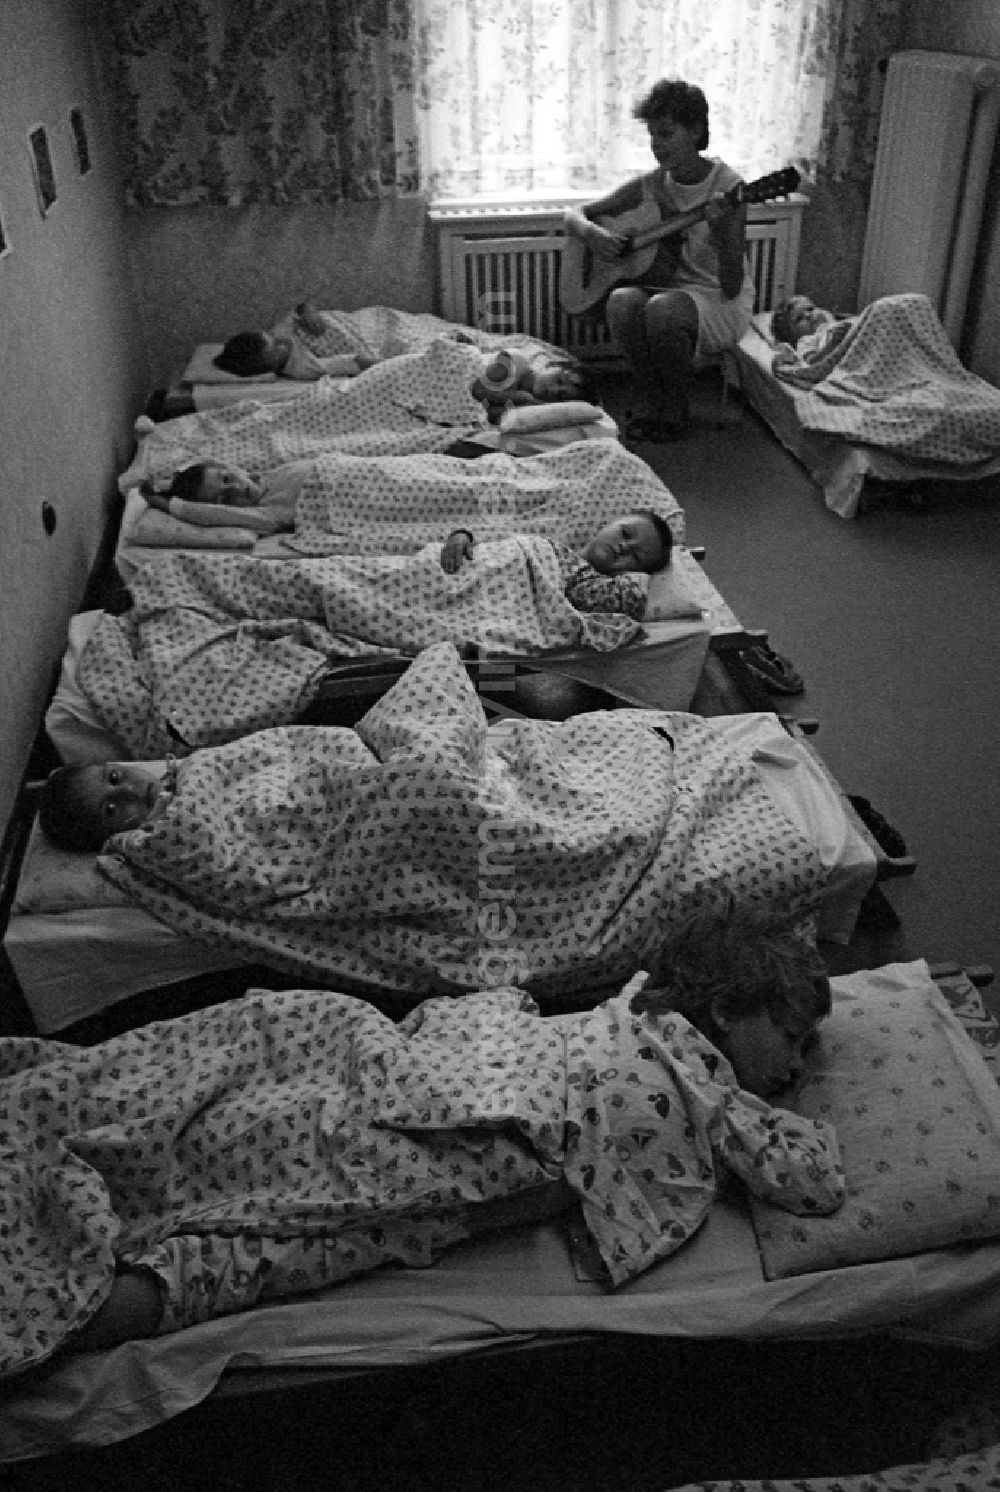 GDR image archive: Berlin - Games and fun with toddlers in kindergarten during the afternoon nap in Berlin Eastberlin, the former capital of the GDR, German Democratic Republic